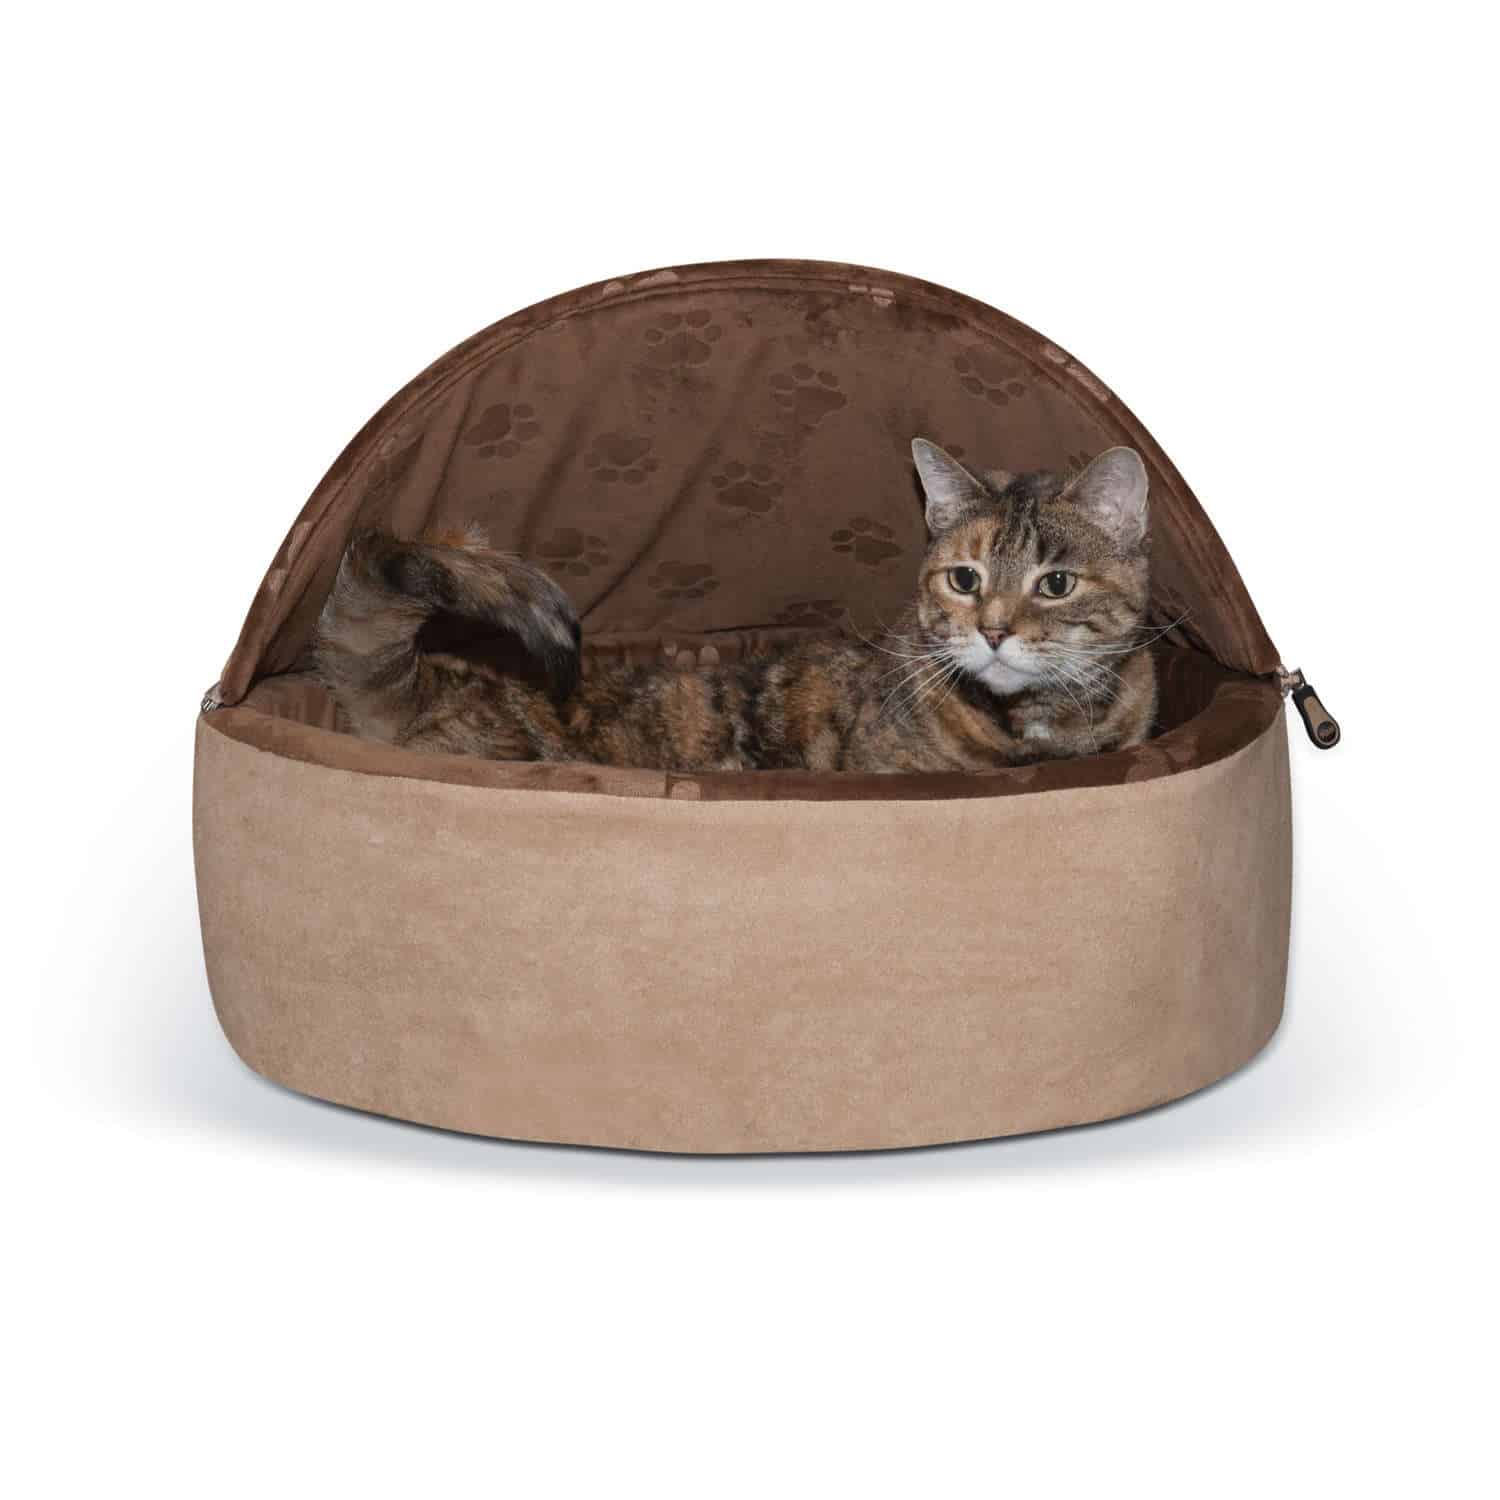 kh2997 Self-Warming Kitty Bed Hooded